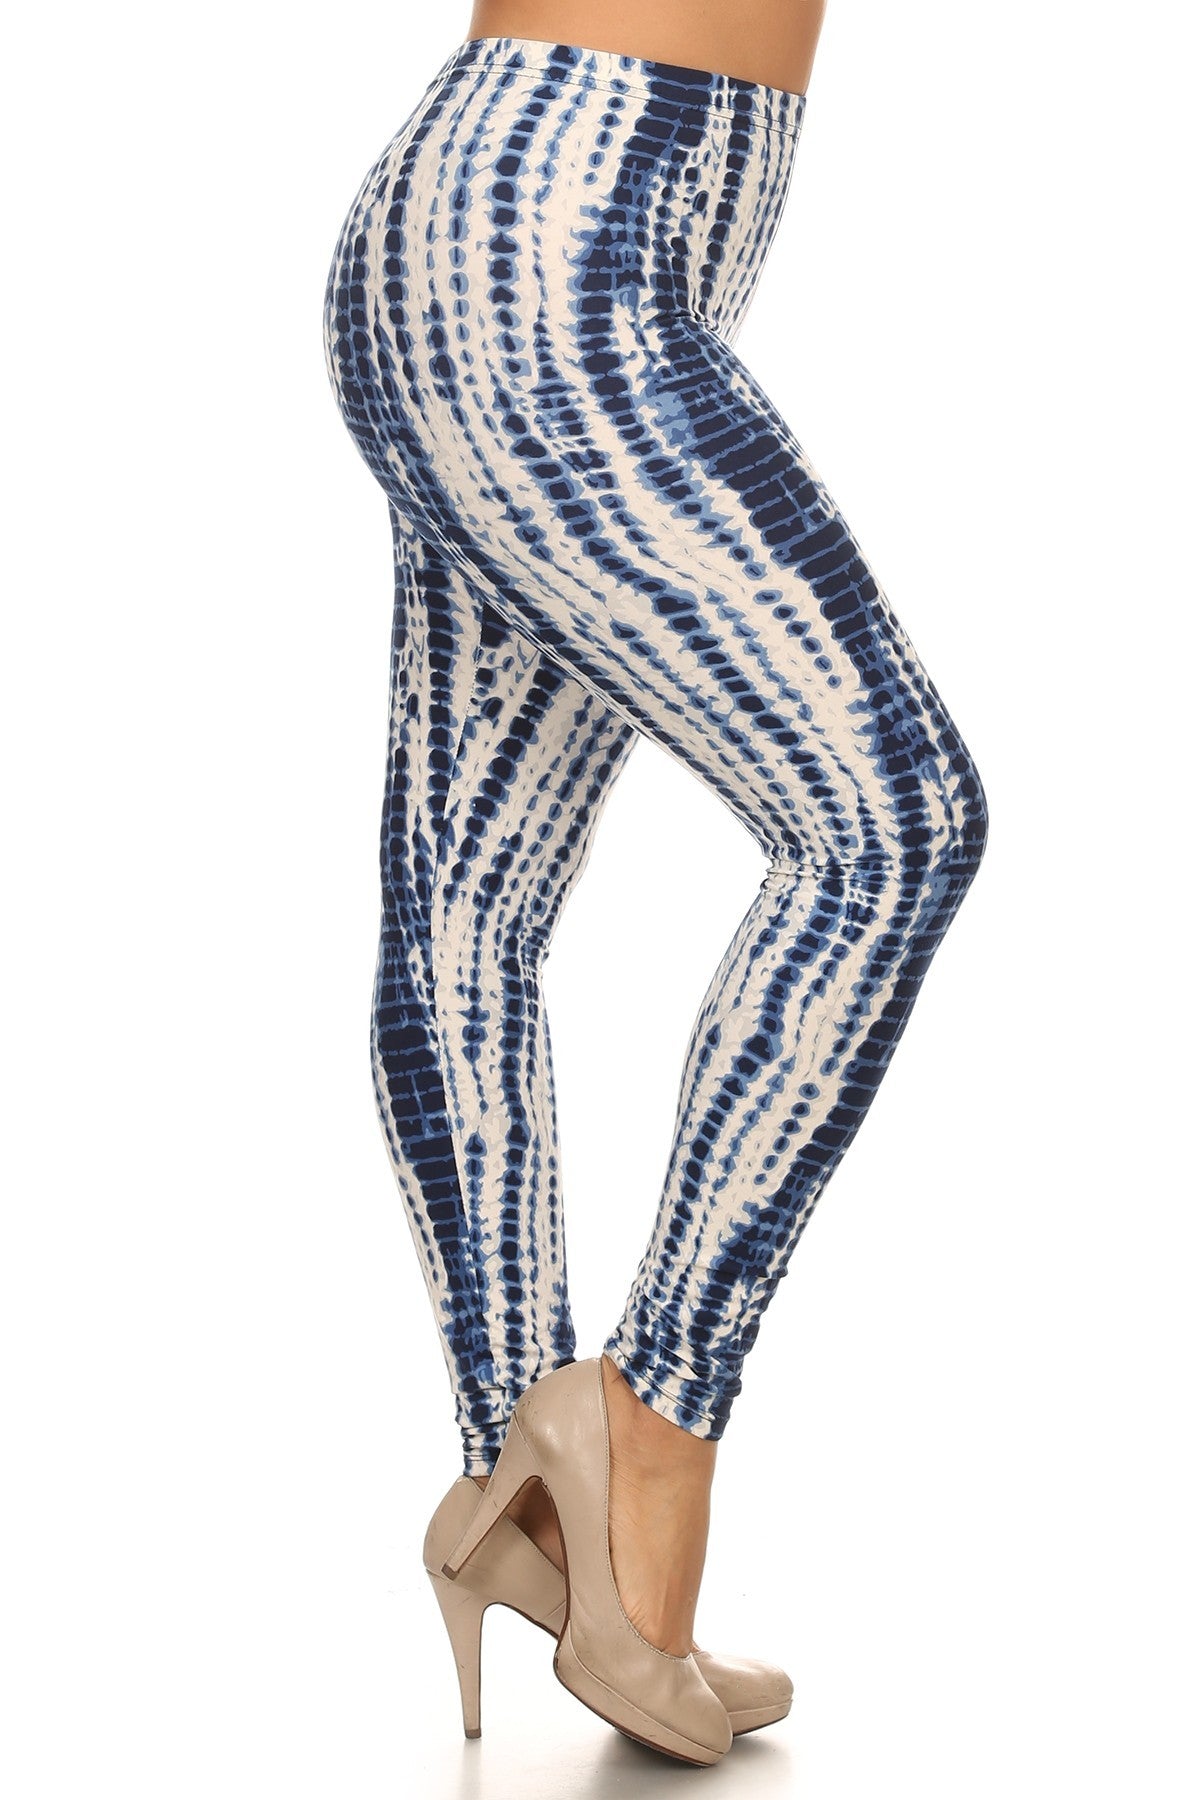 - Voluptuous (+) Plus Size Tie Dye Print, Full Length Leggings In A Slim Fitting Style With A Banded High Waist - womens leggings at TFC&H Co.